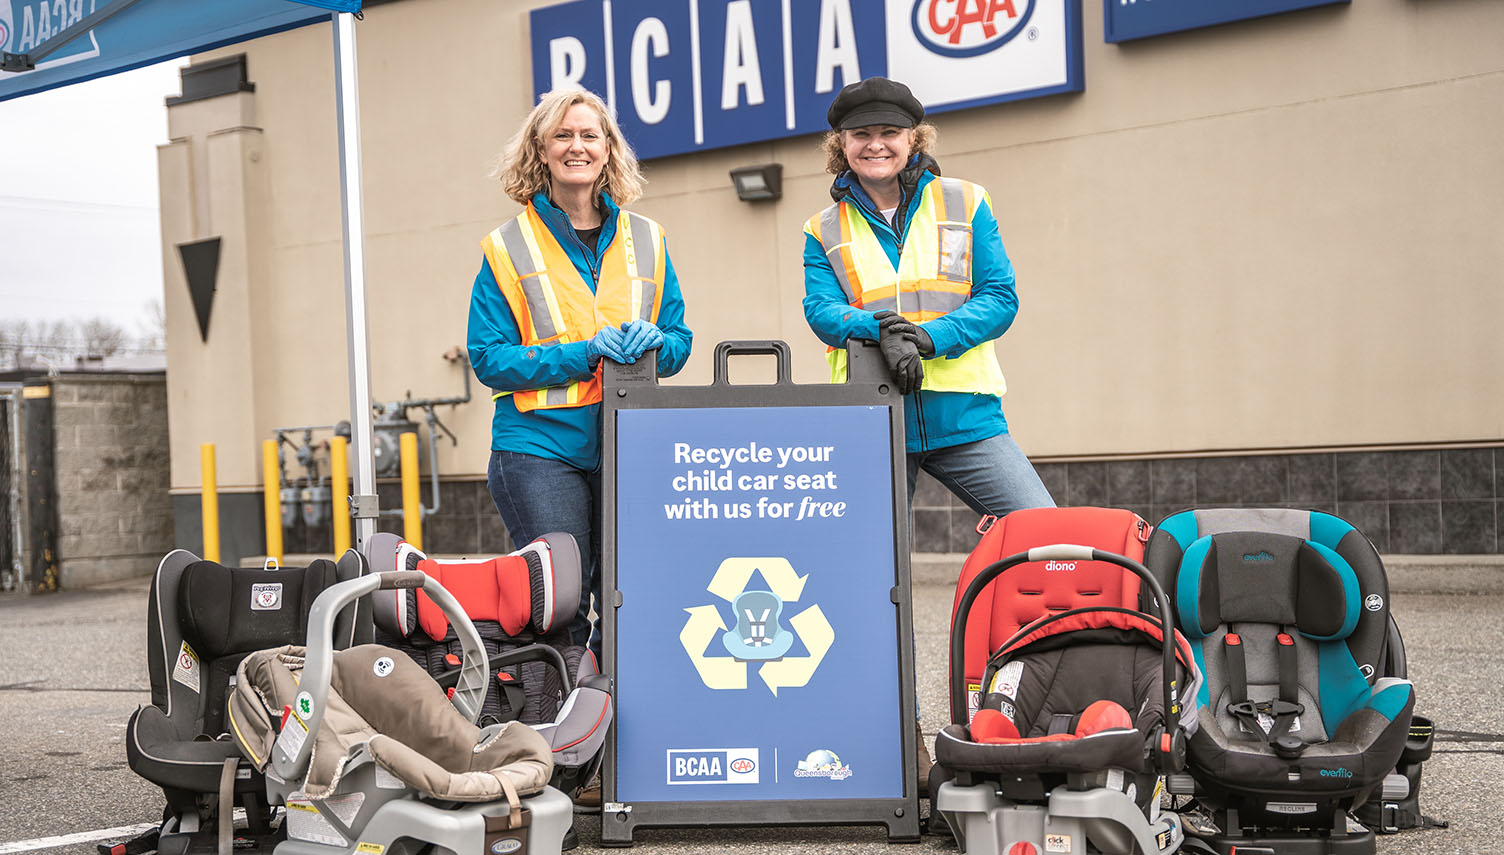 BCAA employees volunteering during a car seat recycling event